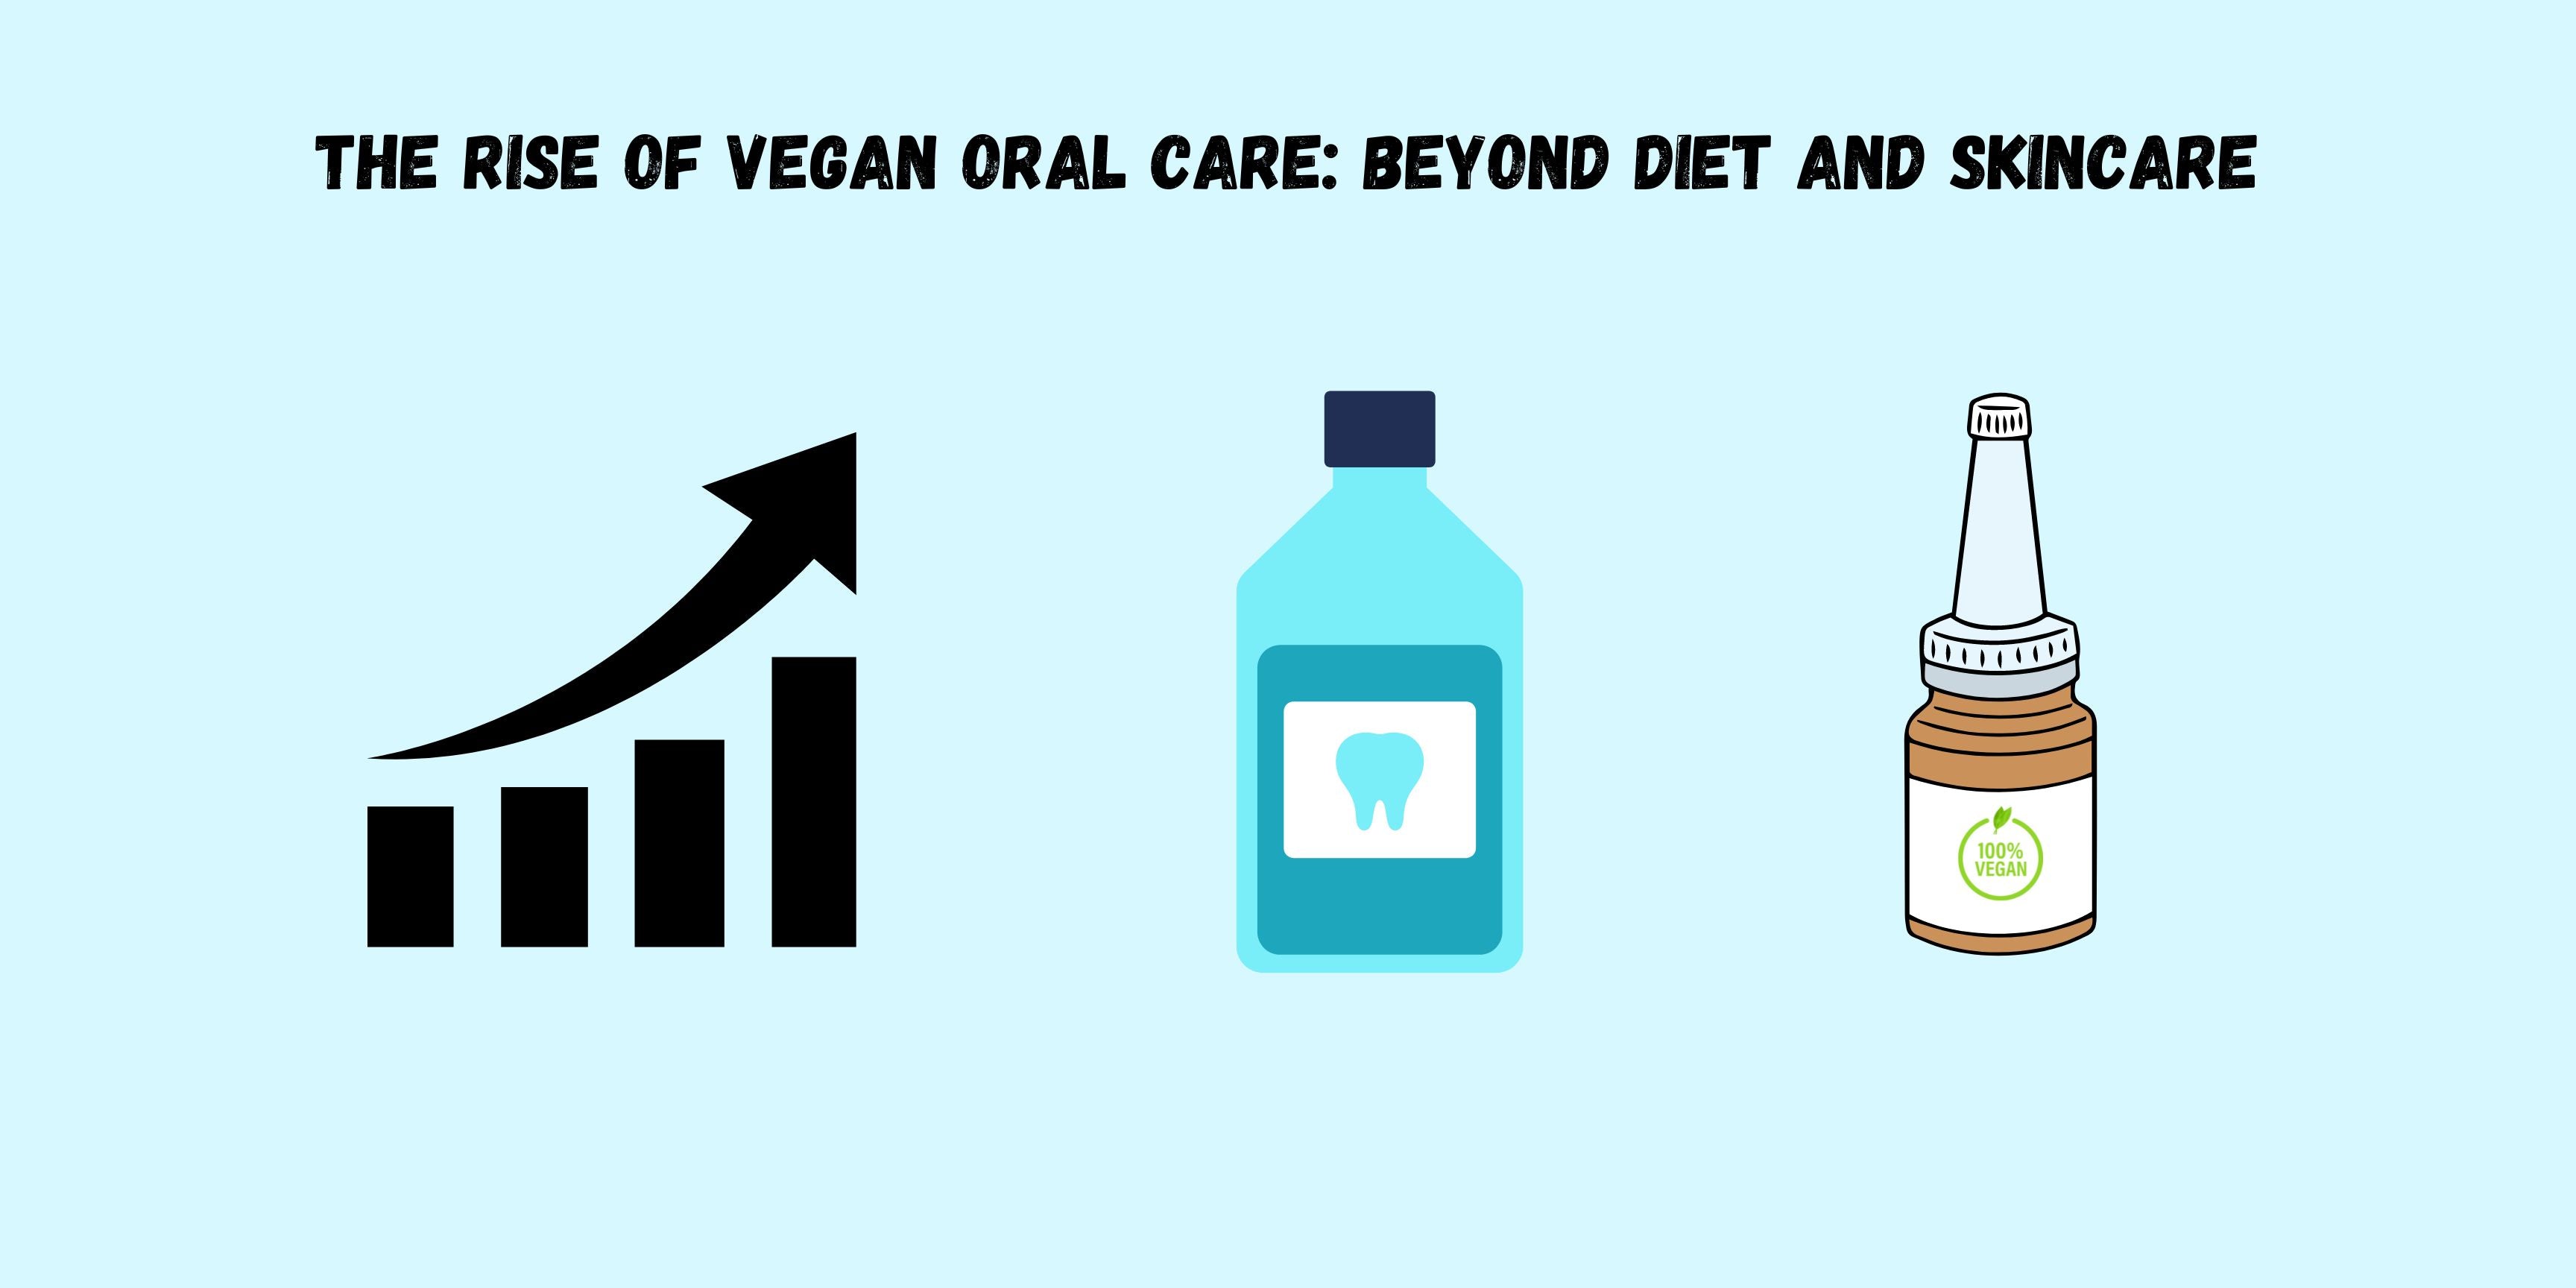 The Rise of Vegan Oral Care Beyond Diet and Skincare